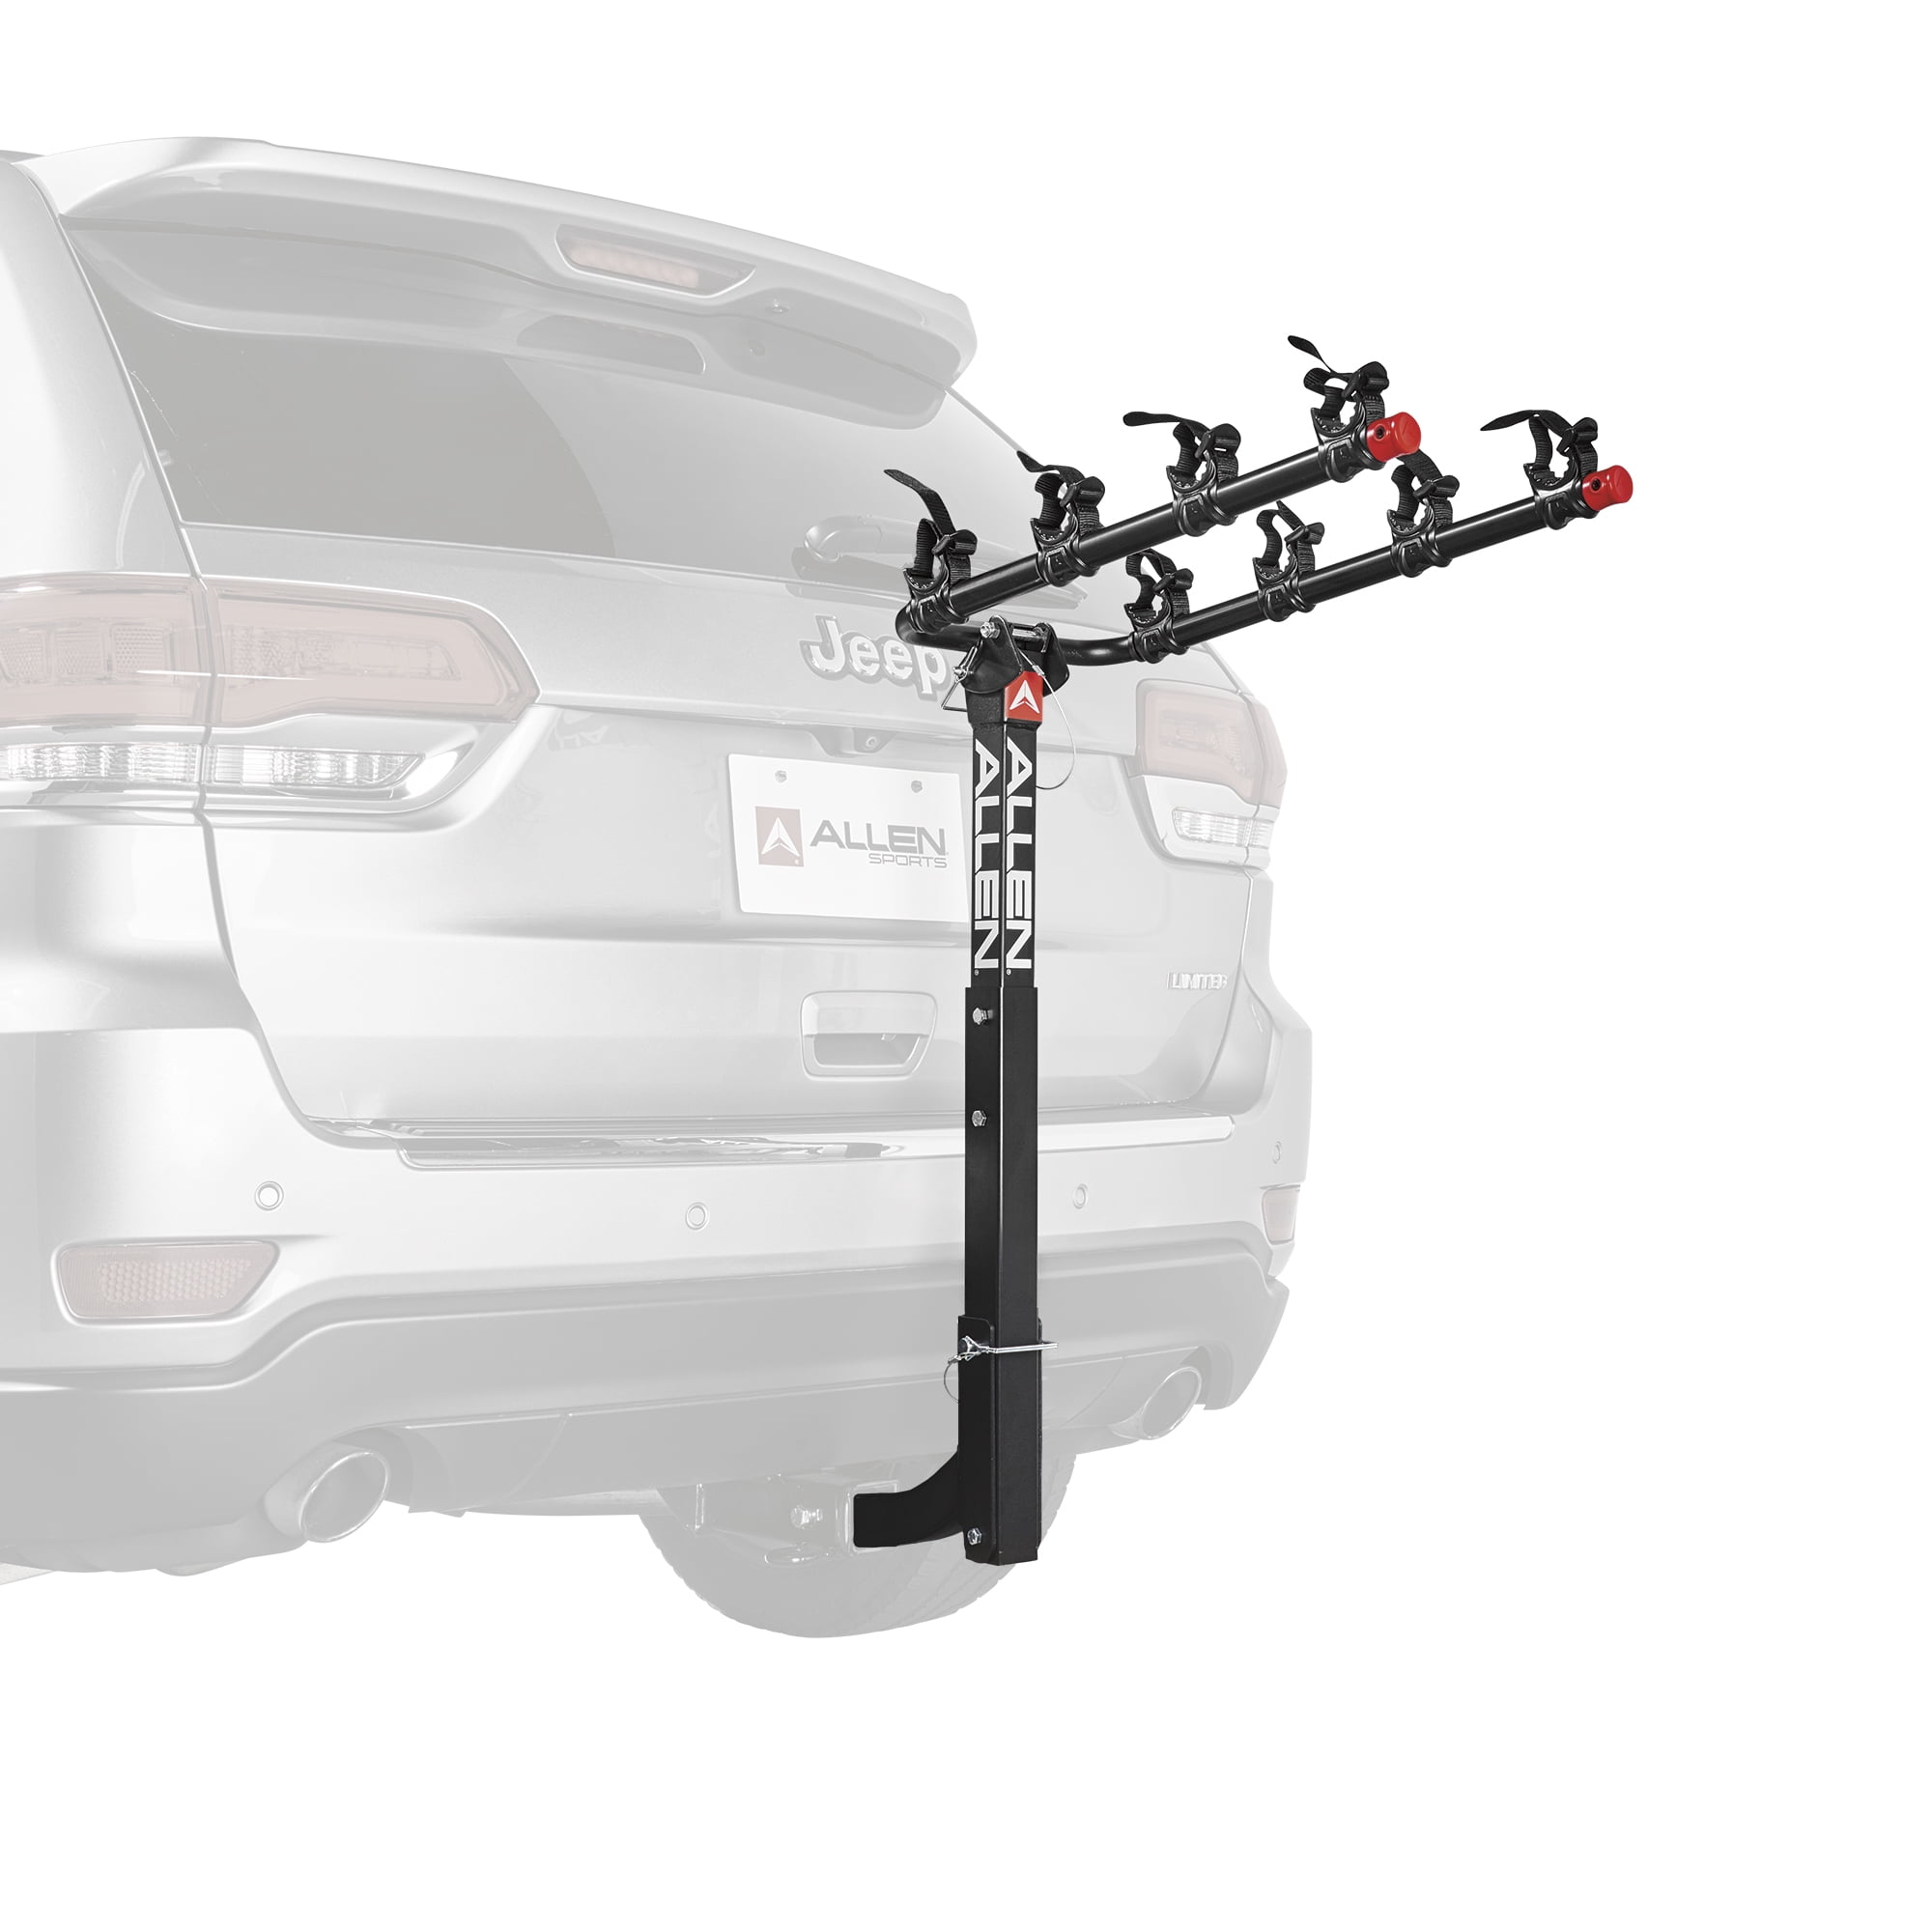 VENZO 2 Bikes Platform Style 1.25" and 2" Hitch Mount Bicycle Carrier 